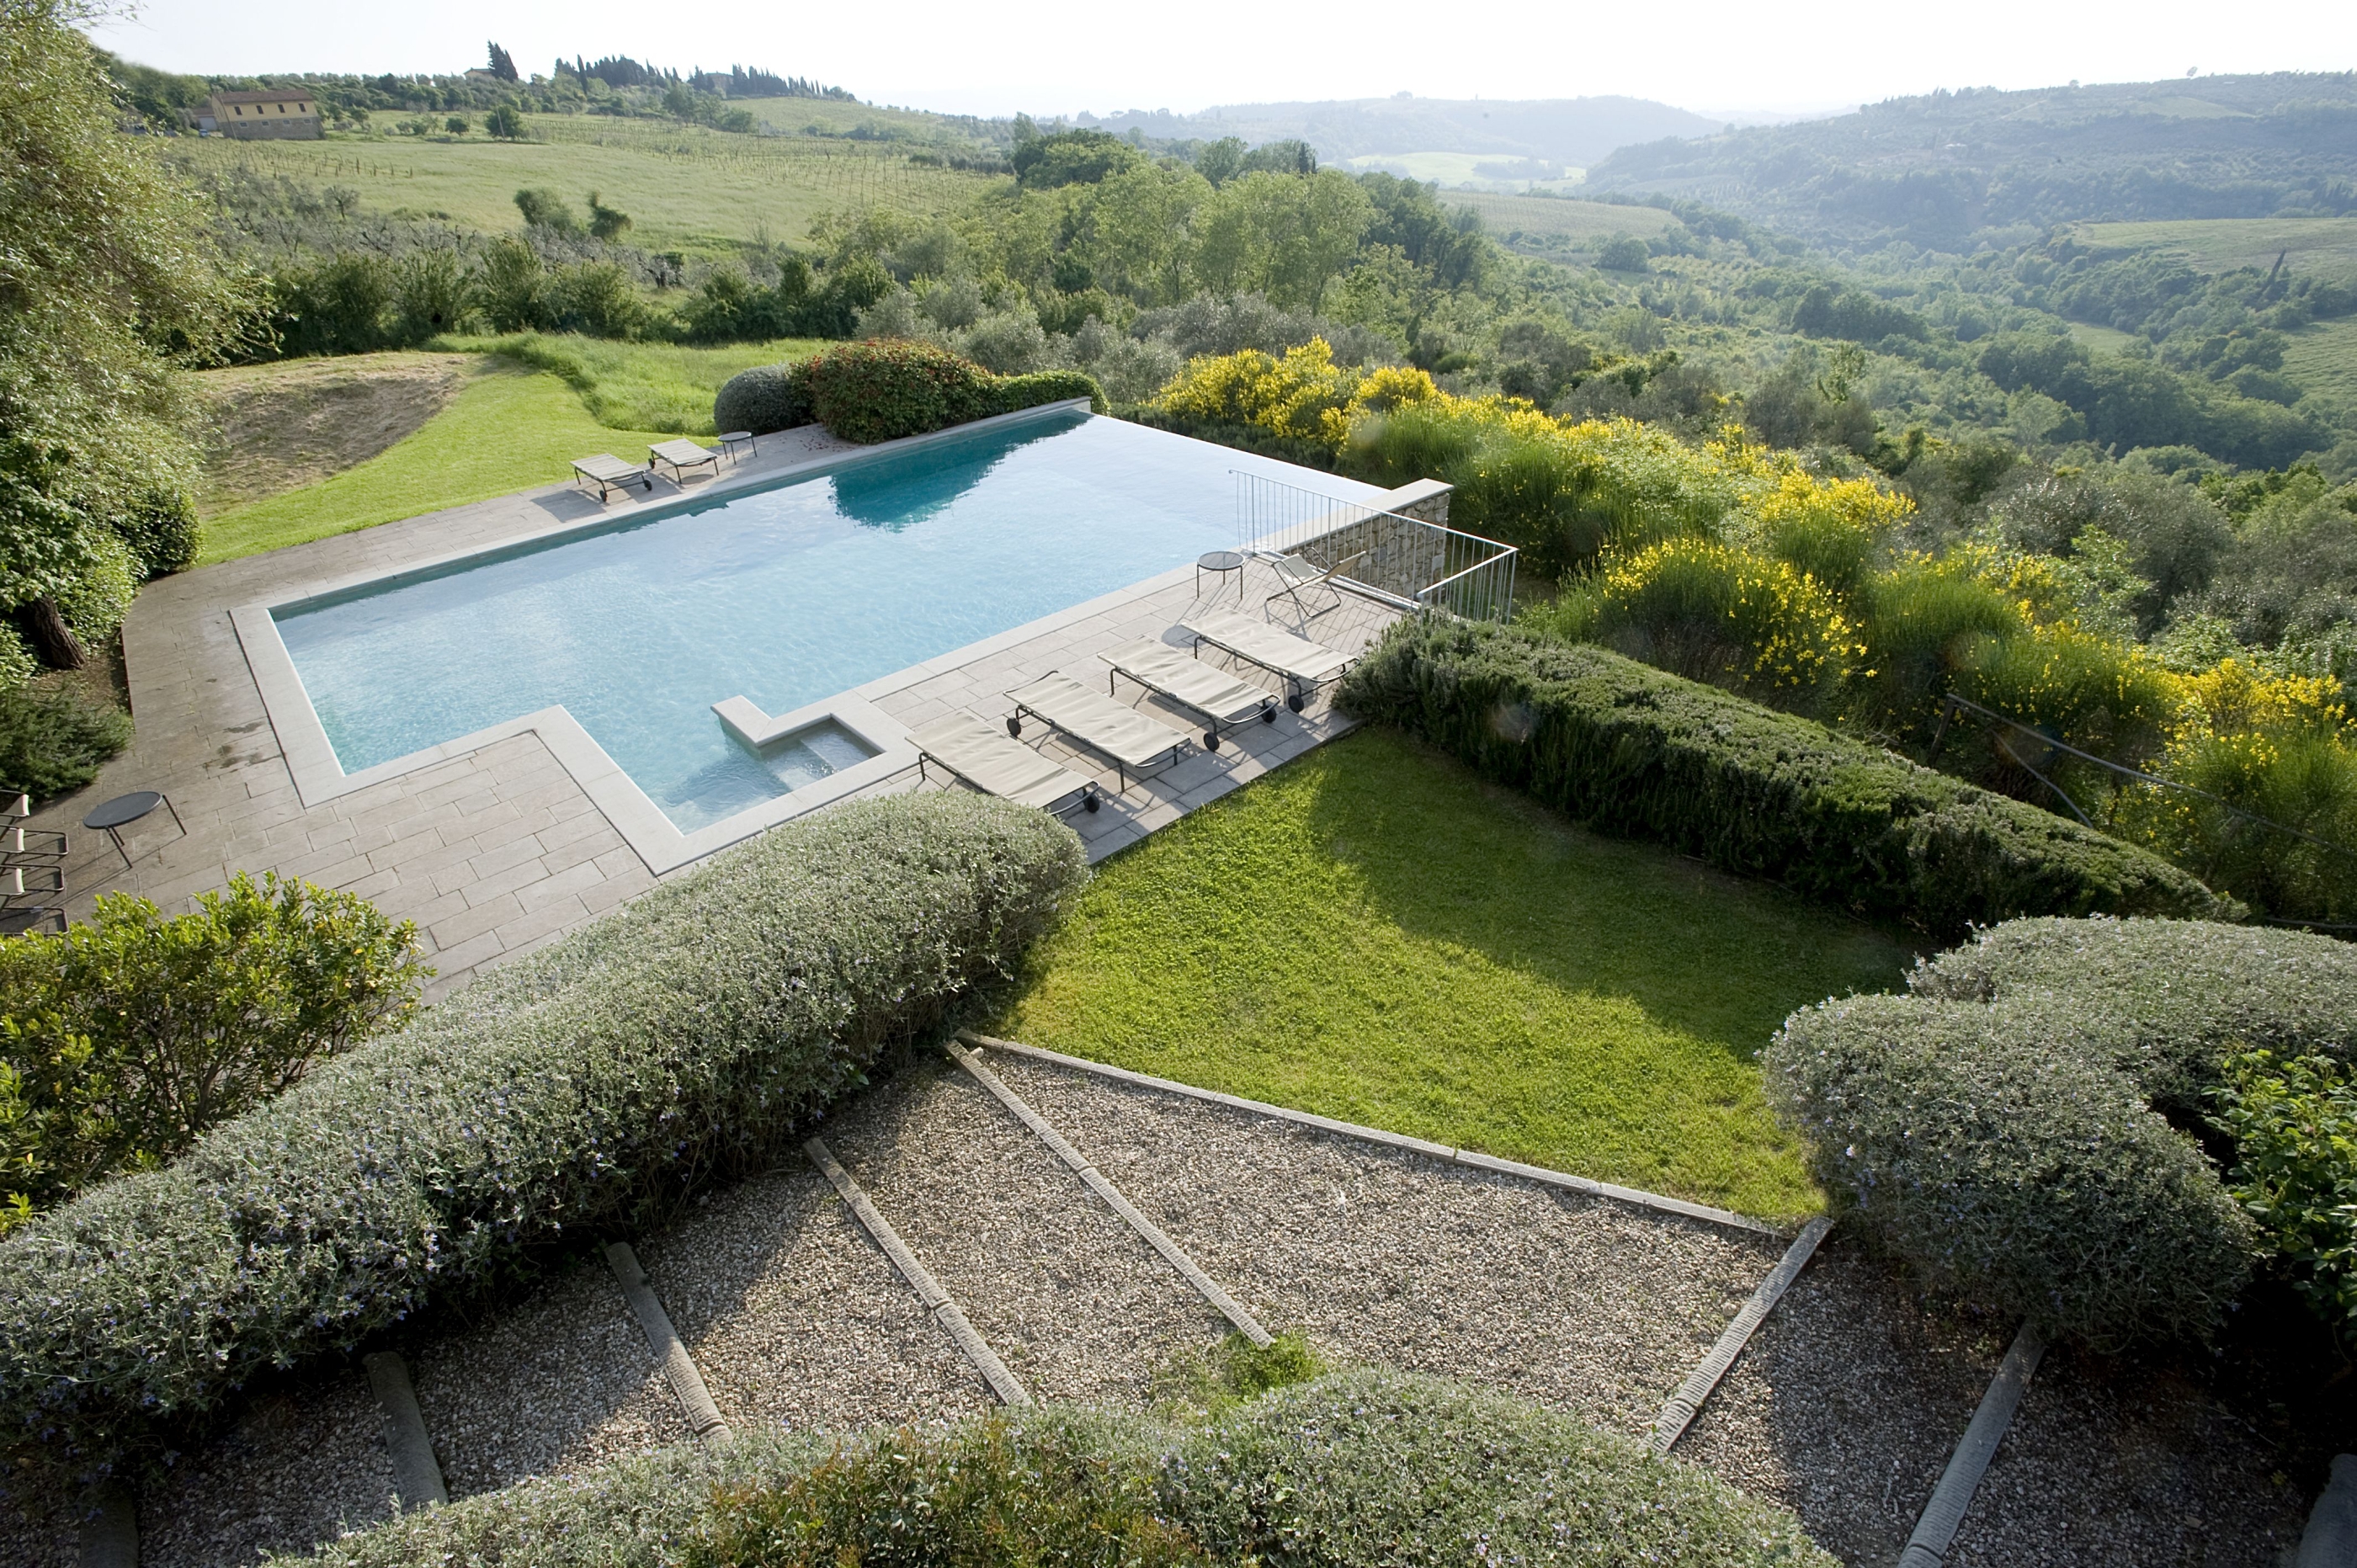 Swimming pool and view from Podere Barberino, Tuscany